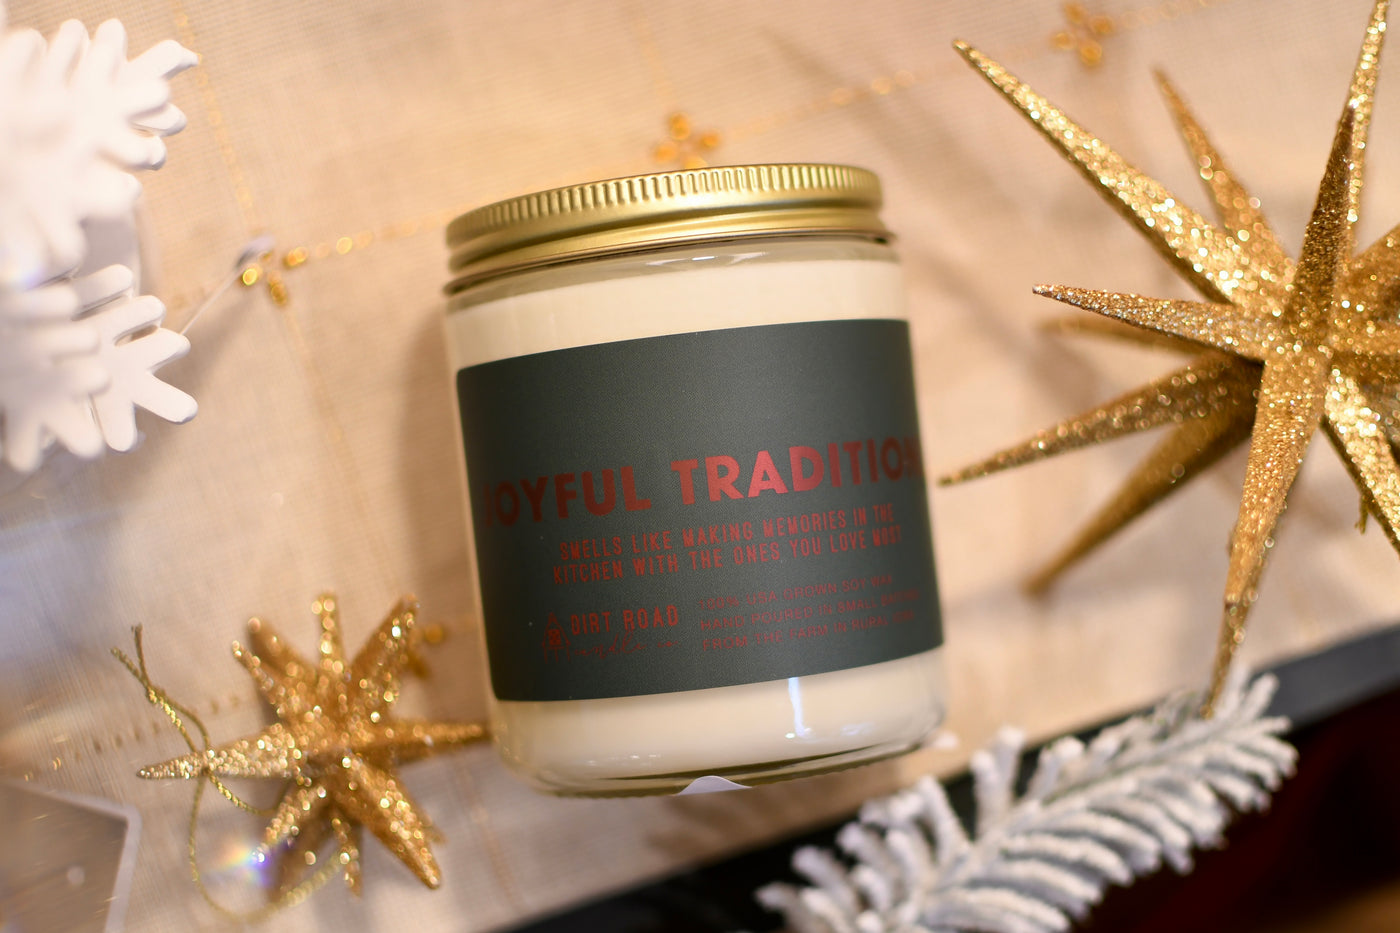 Dirt Road Candle Co Joyful Traditions Candle